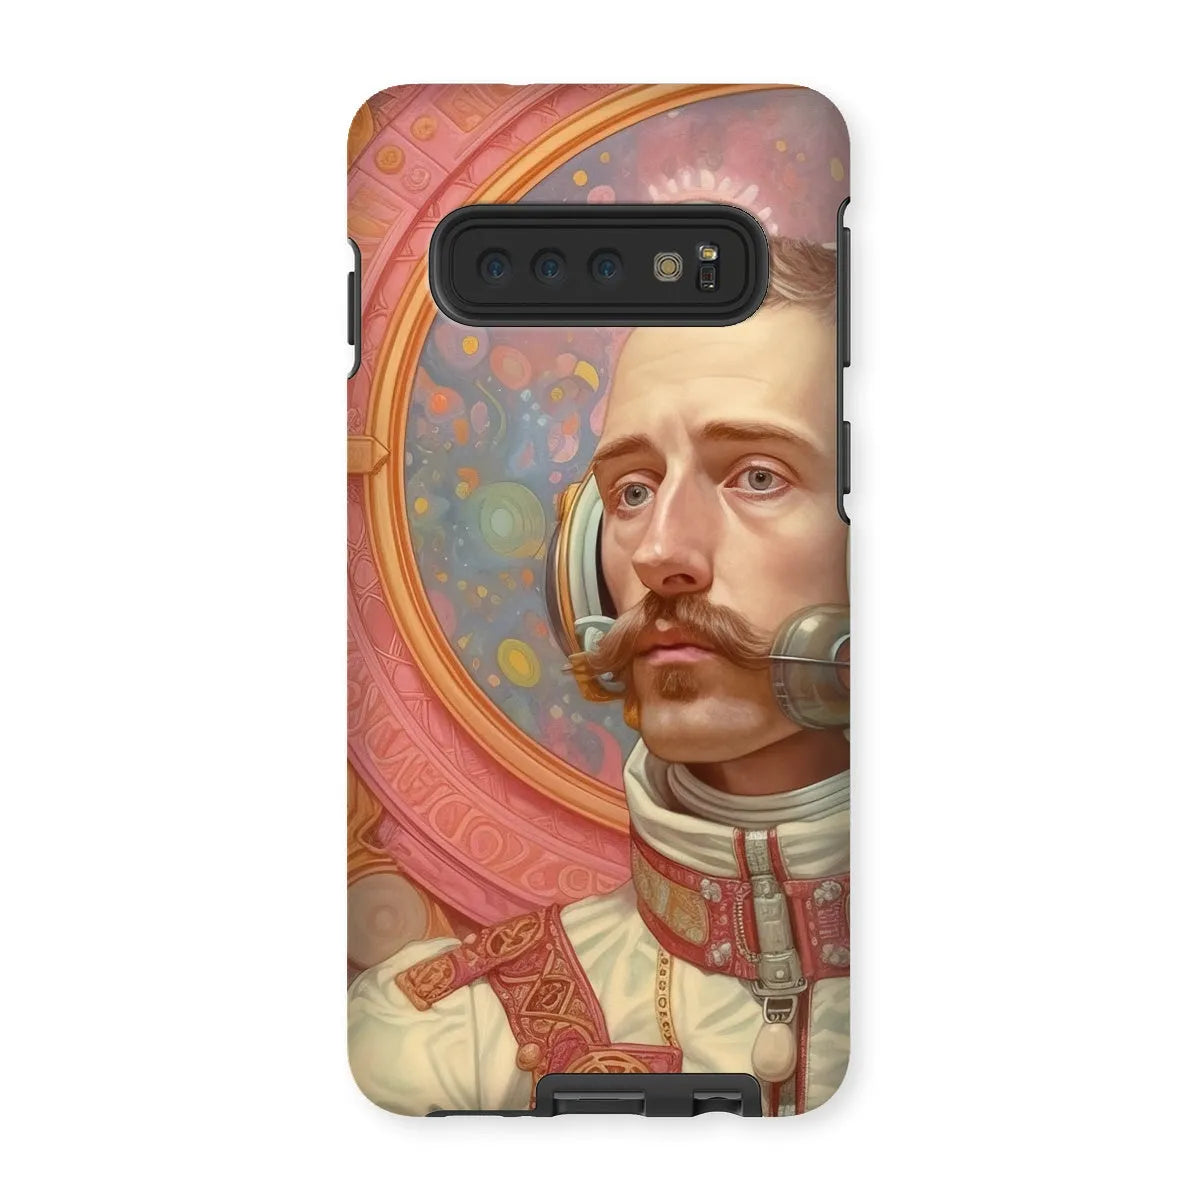 Axel The Gay Astronaut - Gay Aesthetic Art Phone Case - Samsung Galaxy S10 / Matte - Mobile Phone Cases - Aesthetic Art